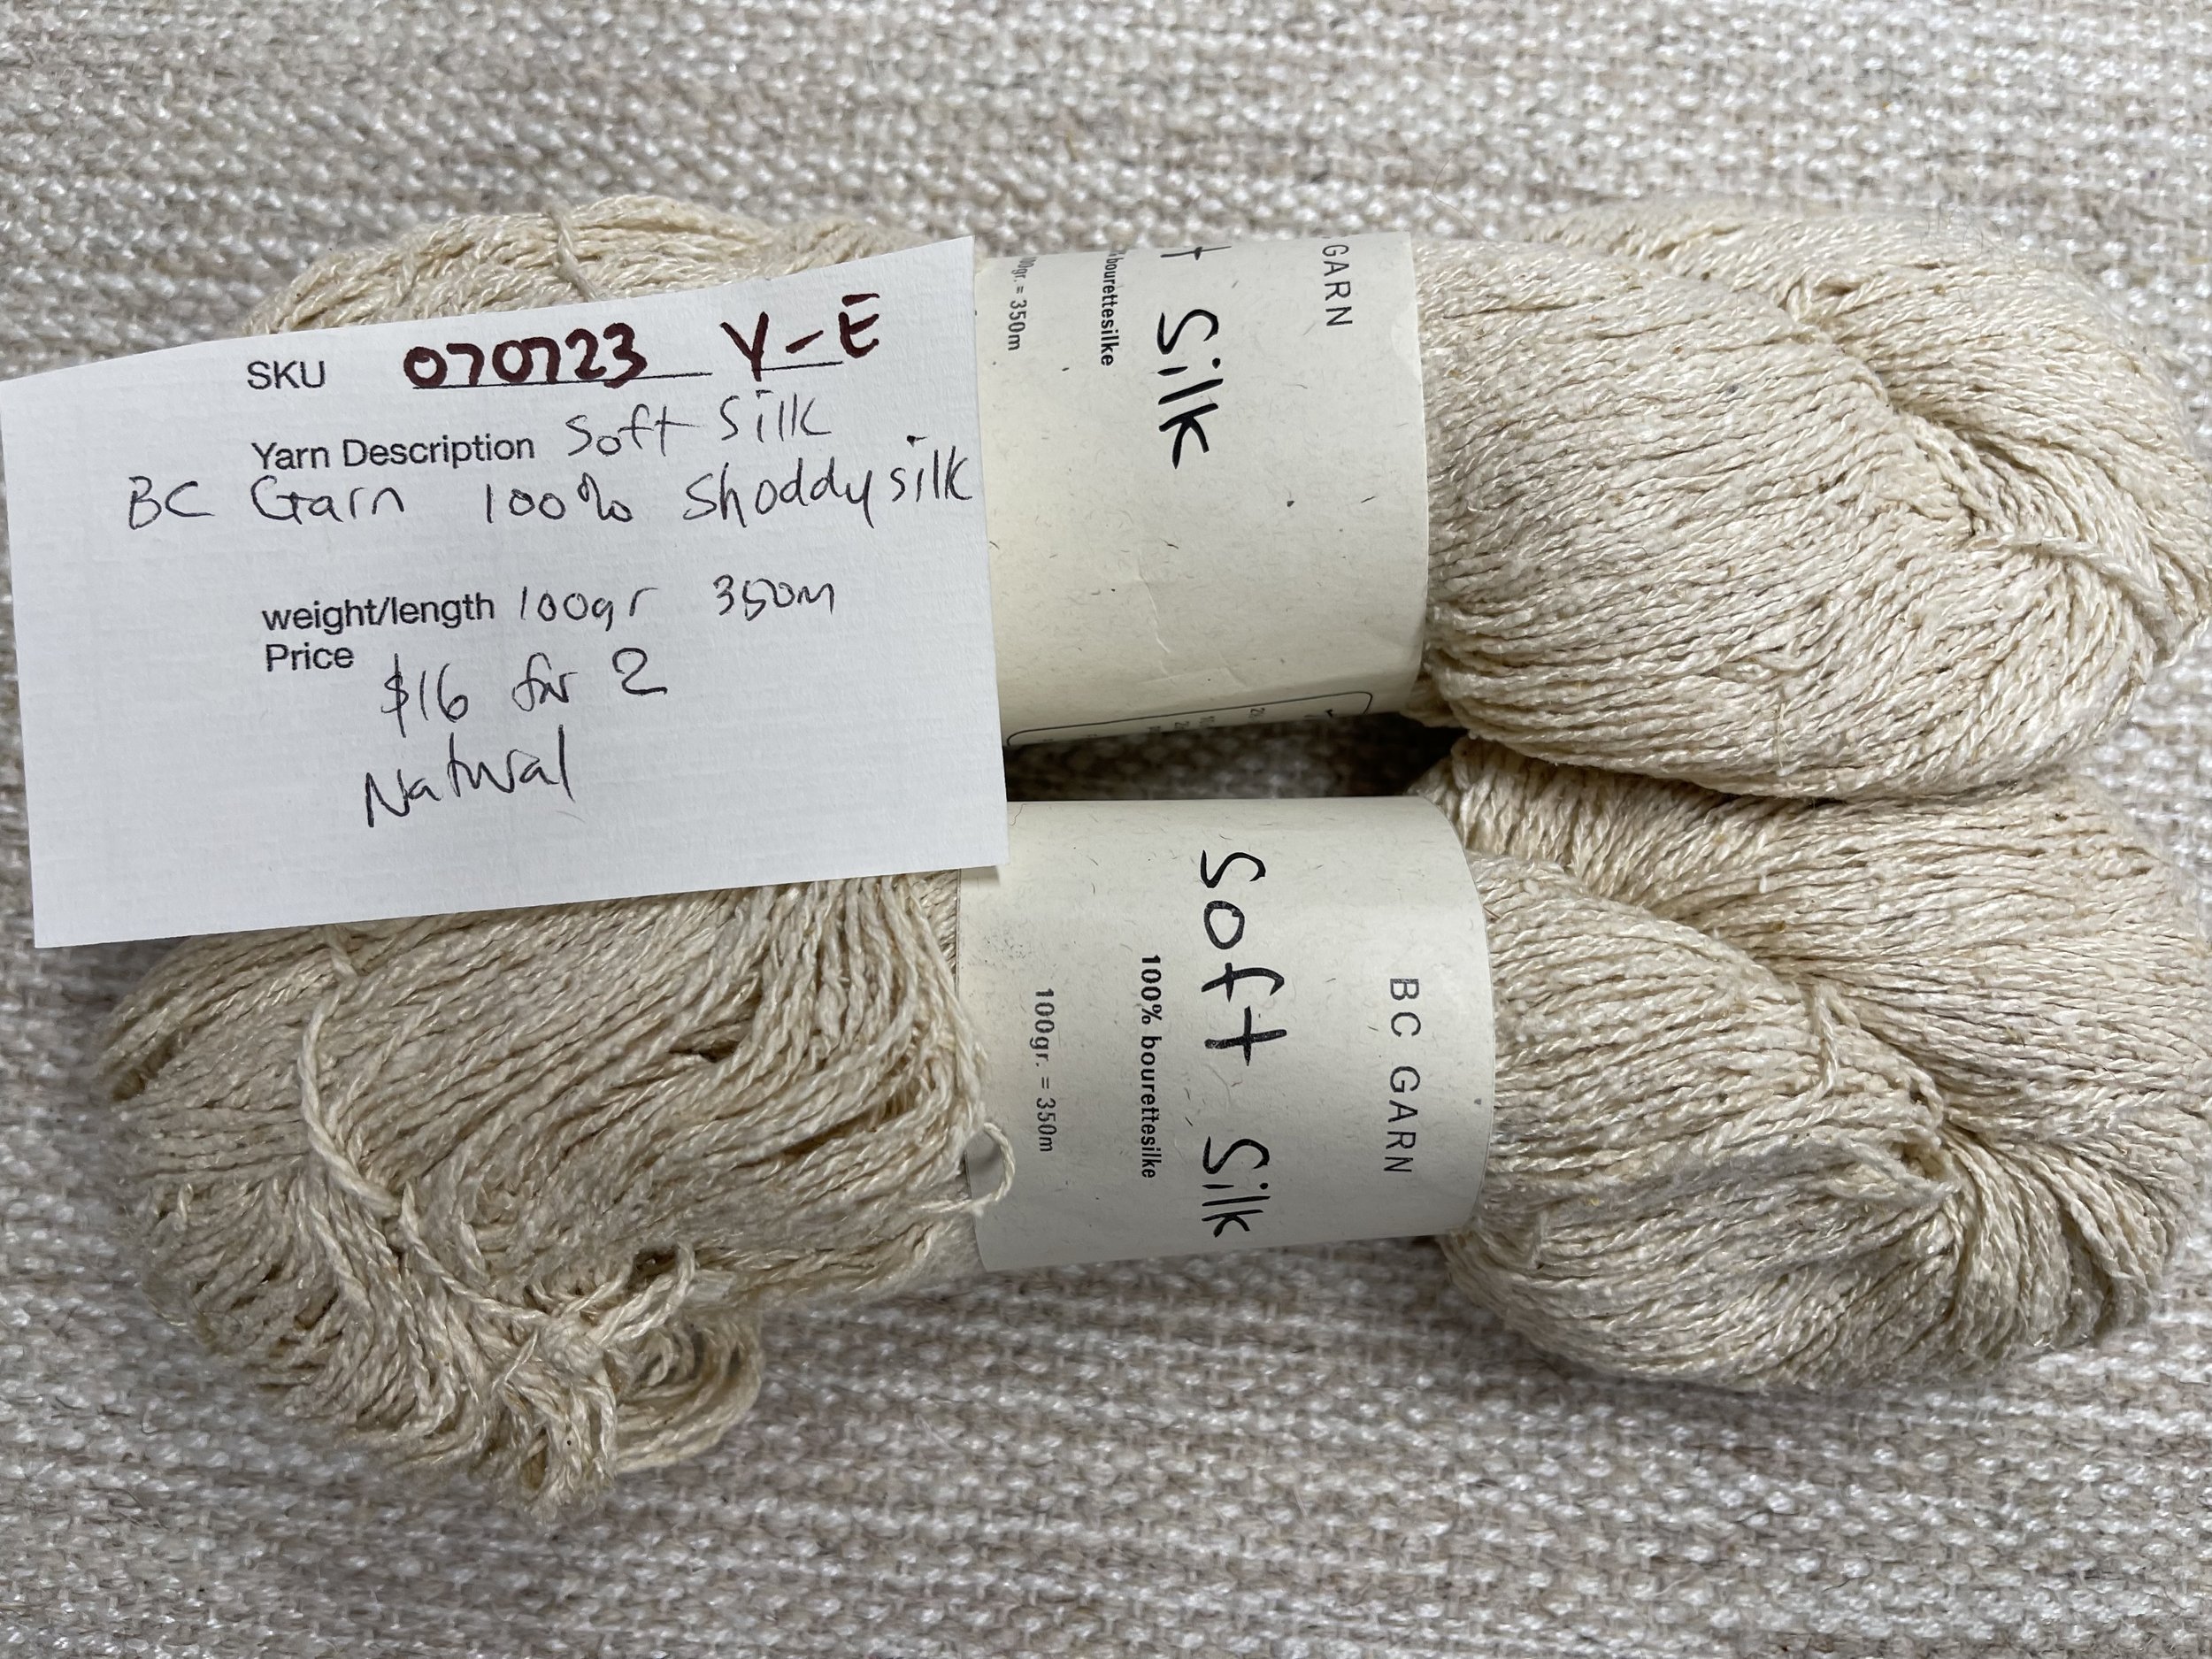 Snuble pence boykot 070723-Y-E BC Garn Soft Silk, natural, 100 g, 350m, lot of 2 — FabMo